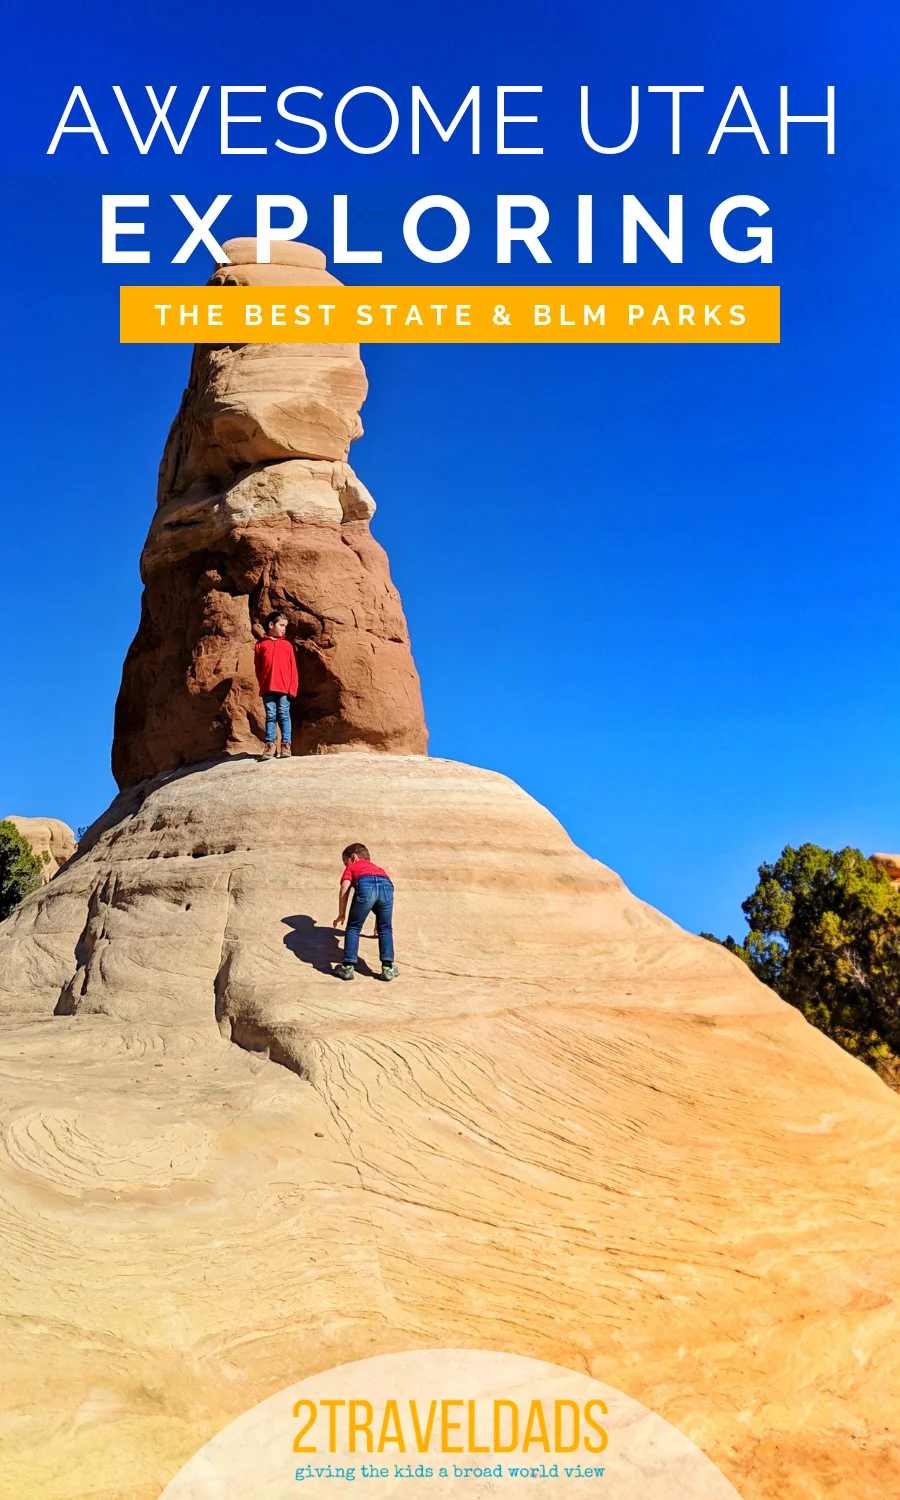 Utah State Parks and BLM sites are just as incredible as its National Parks. Great day trips from Zion or Bryce Canyon, outdoor exploring and hiking.